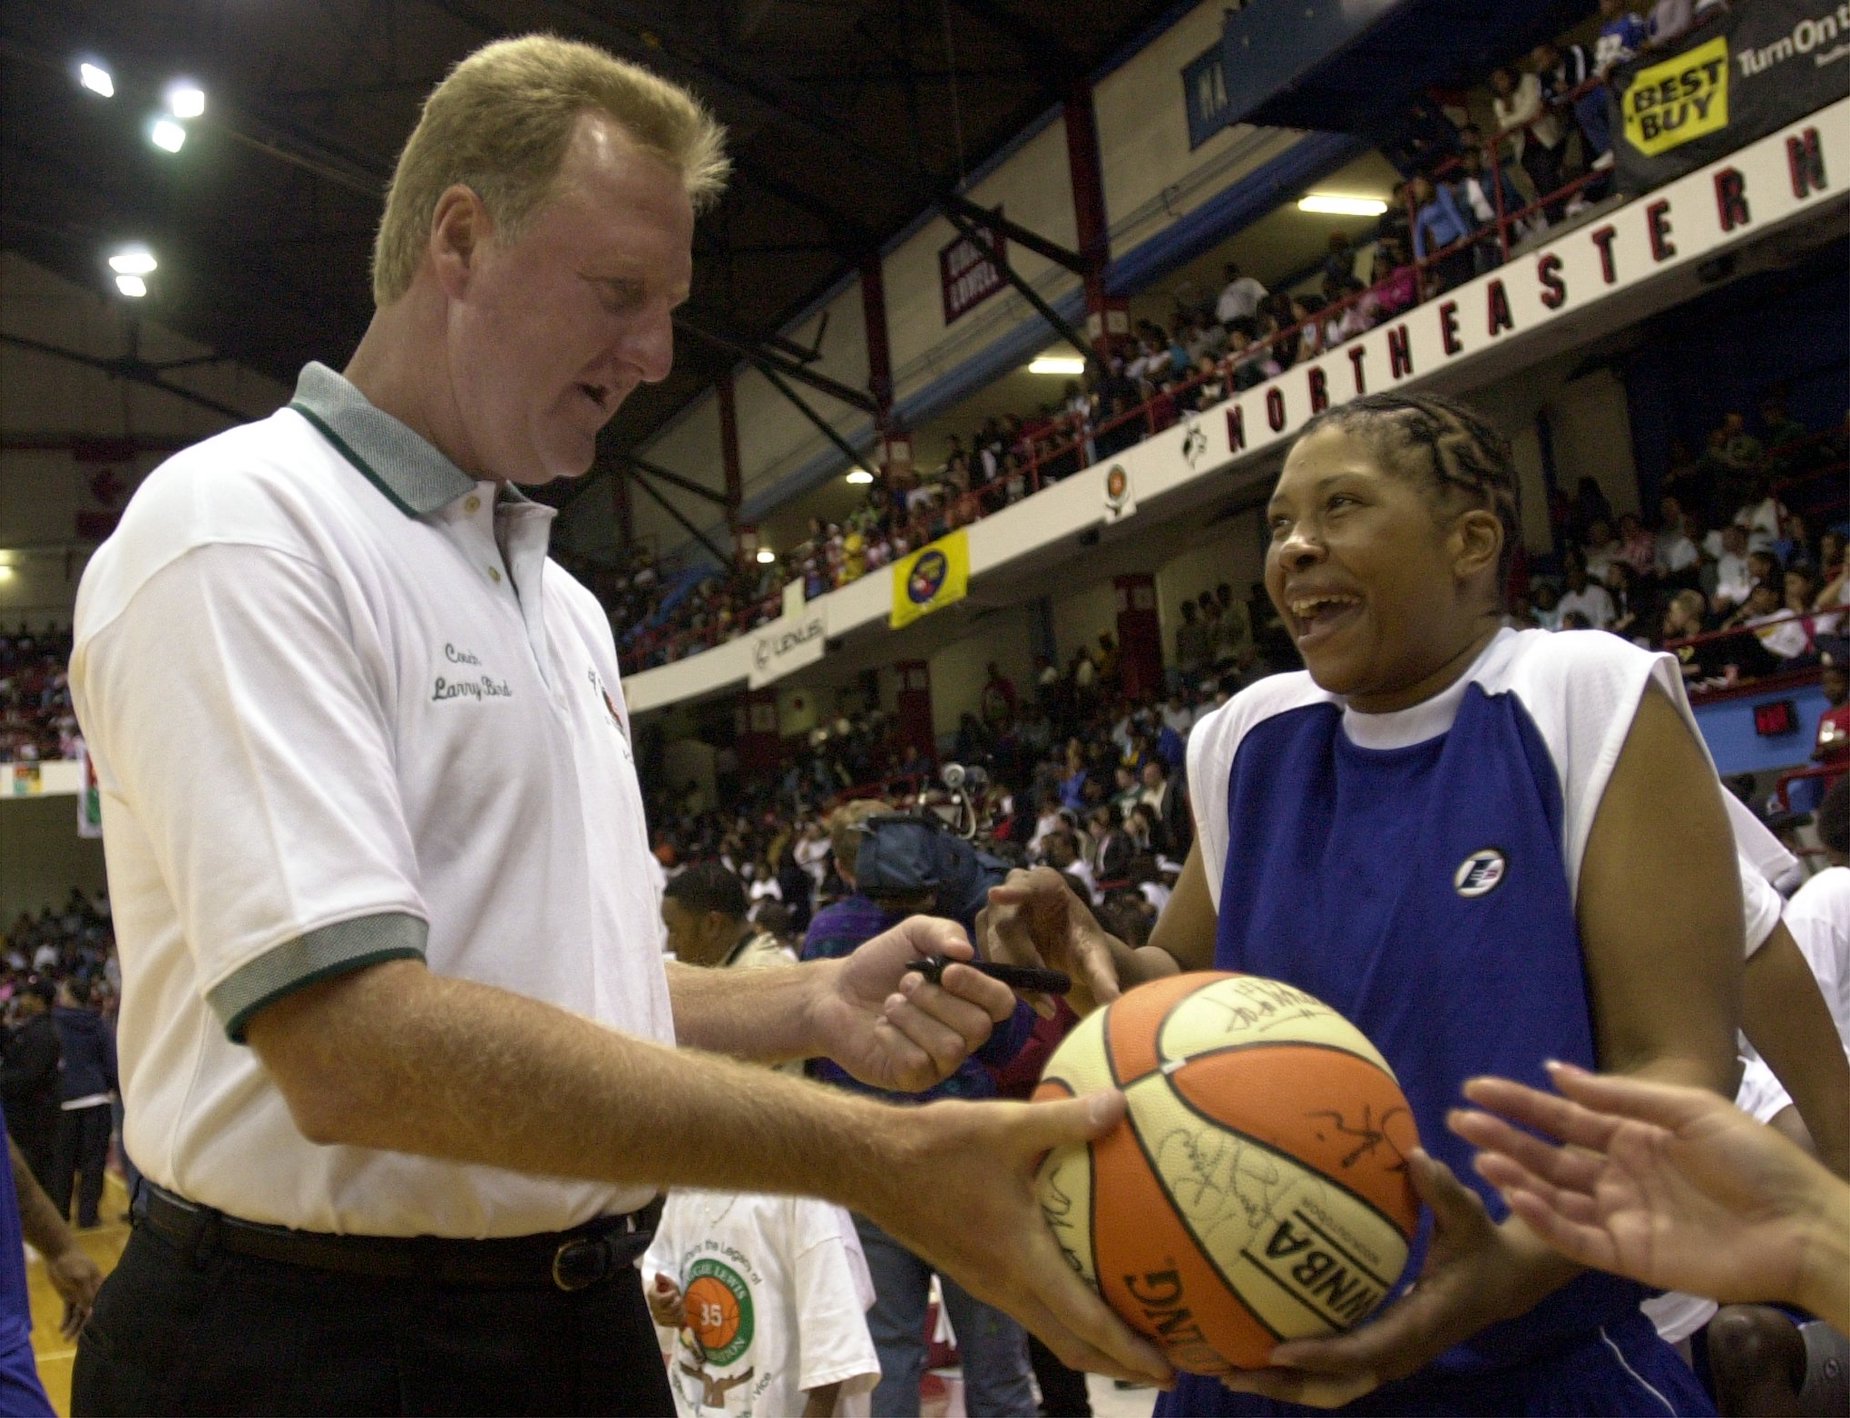 Boston Celtics great Larry Bird signs an autograph at the 2001 Celebrity Basketball Challenge